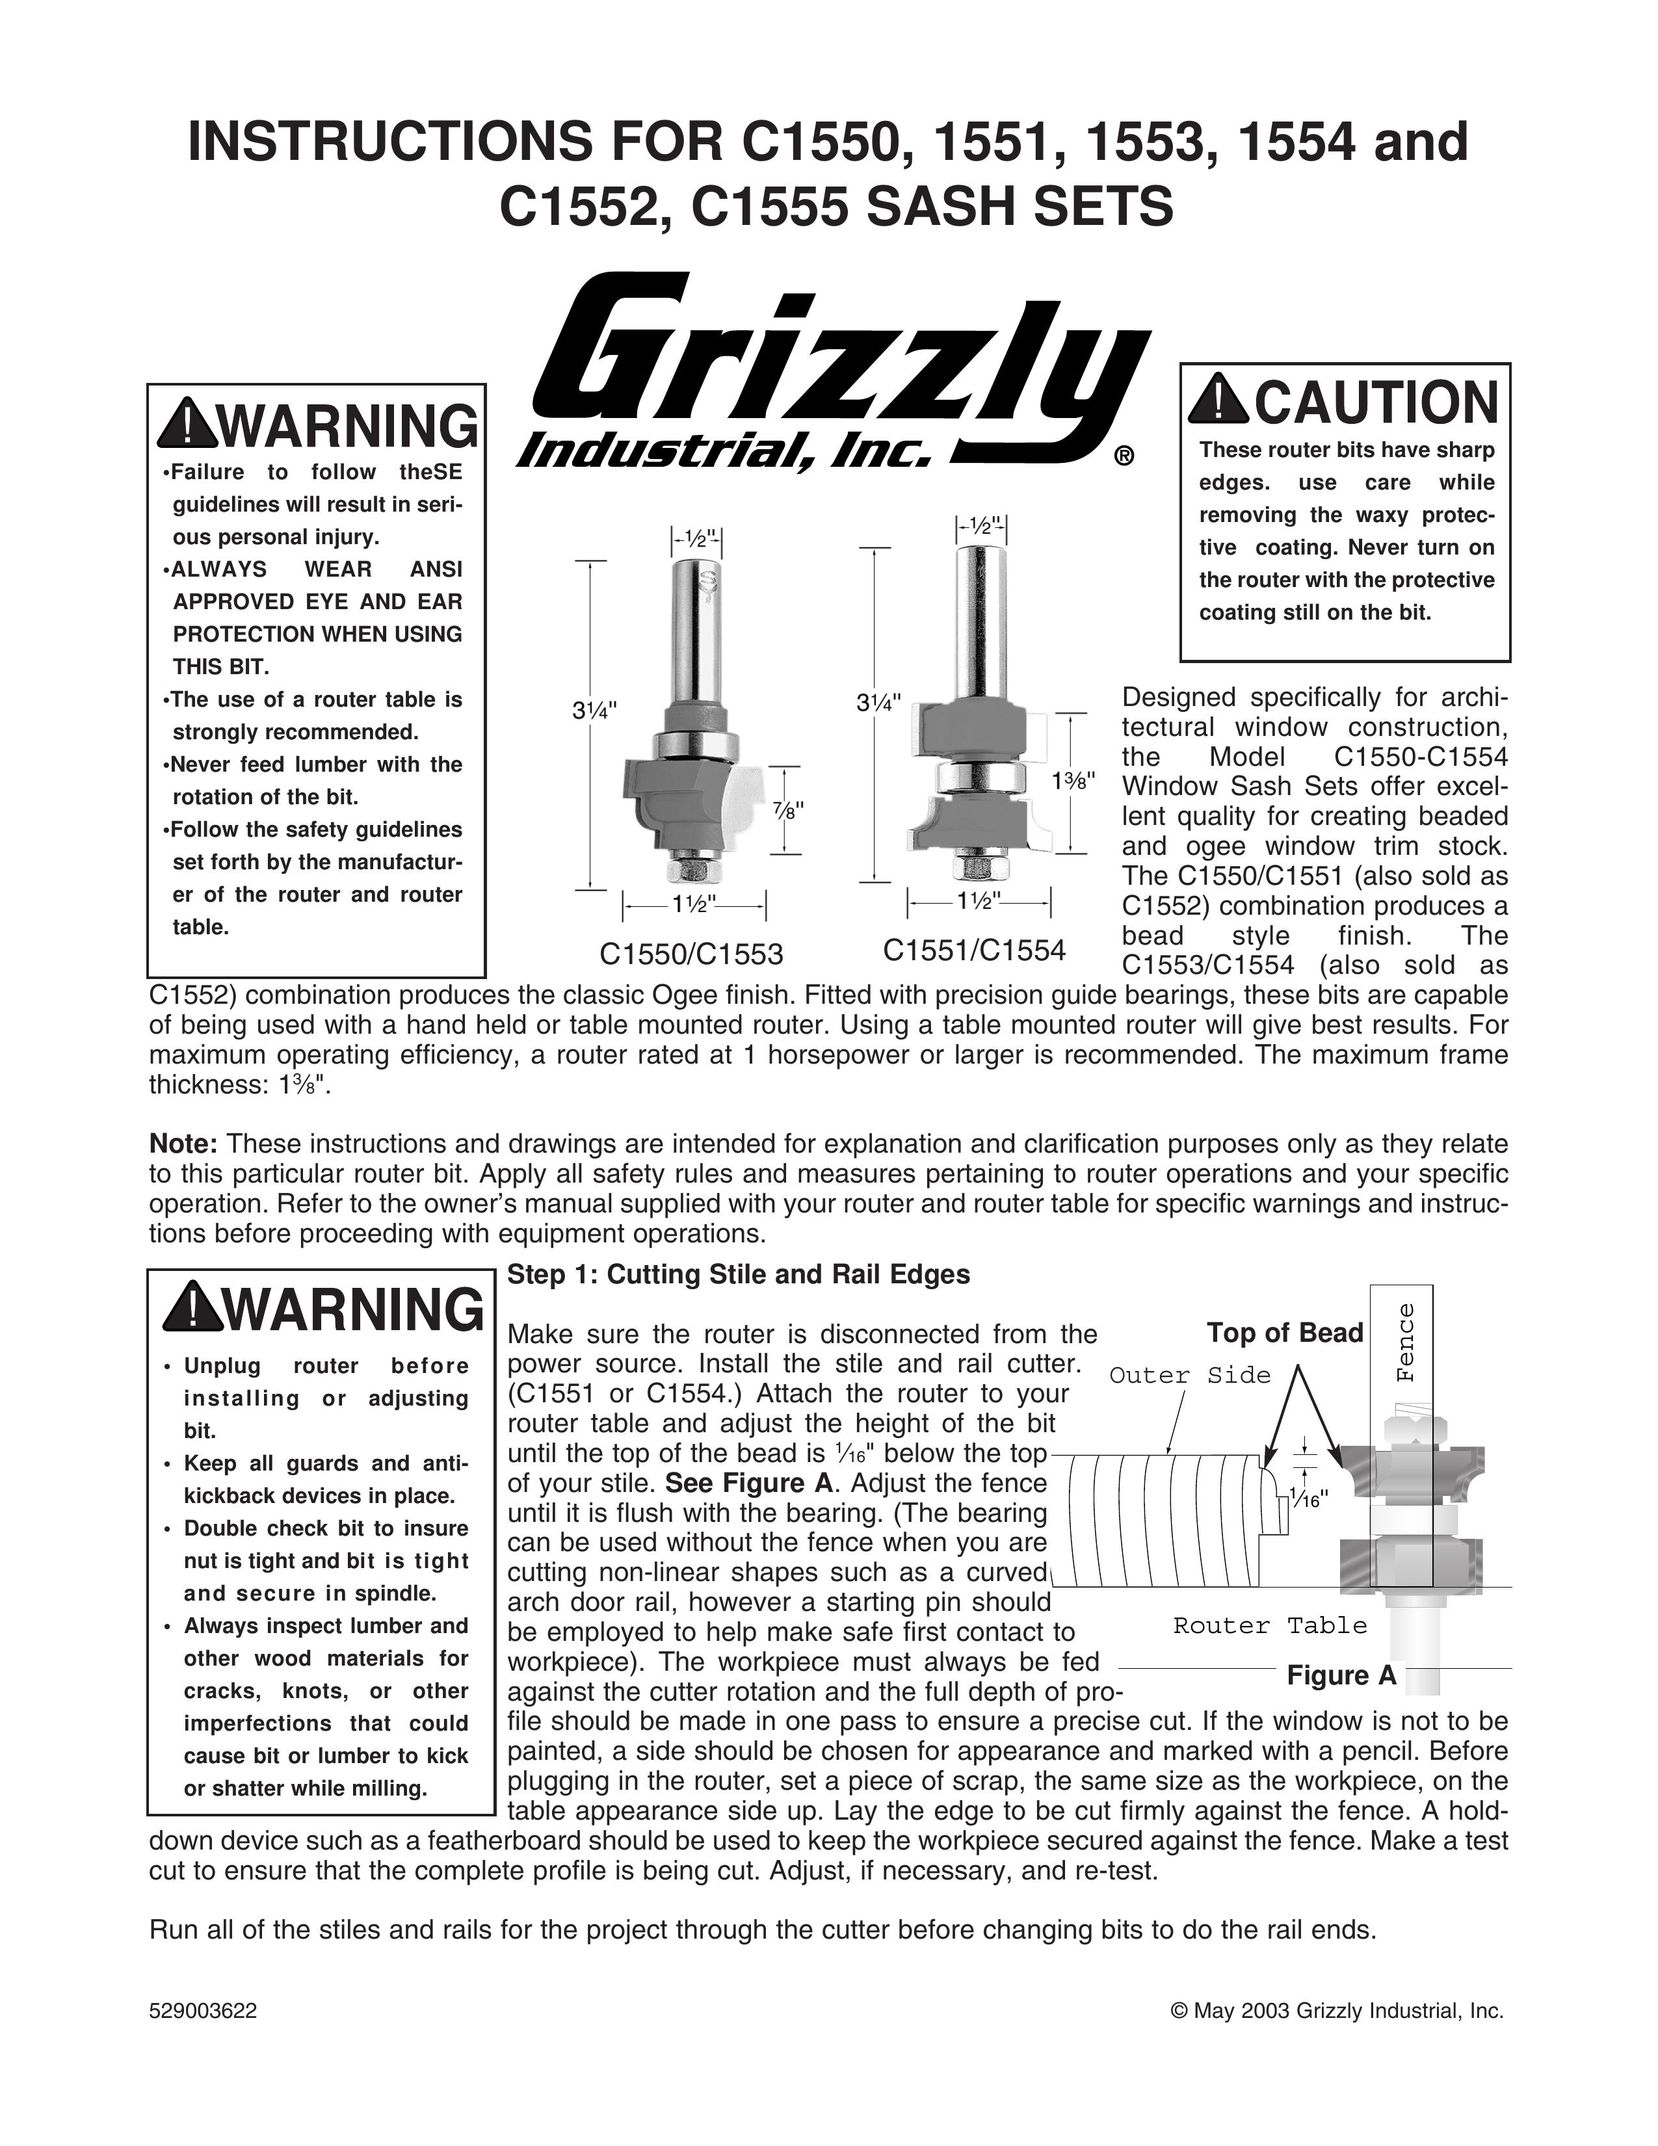 Grizzly 1554 Window User Manual